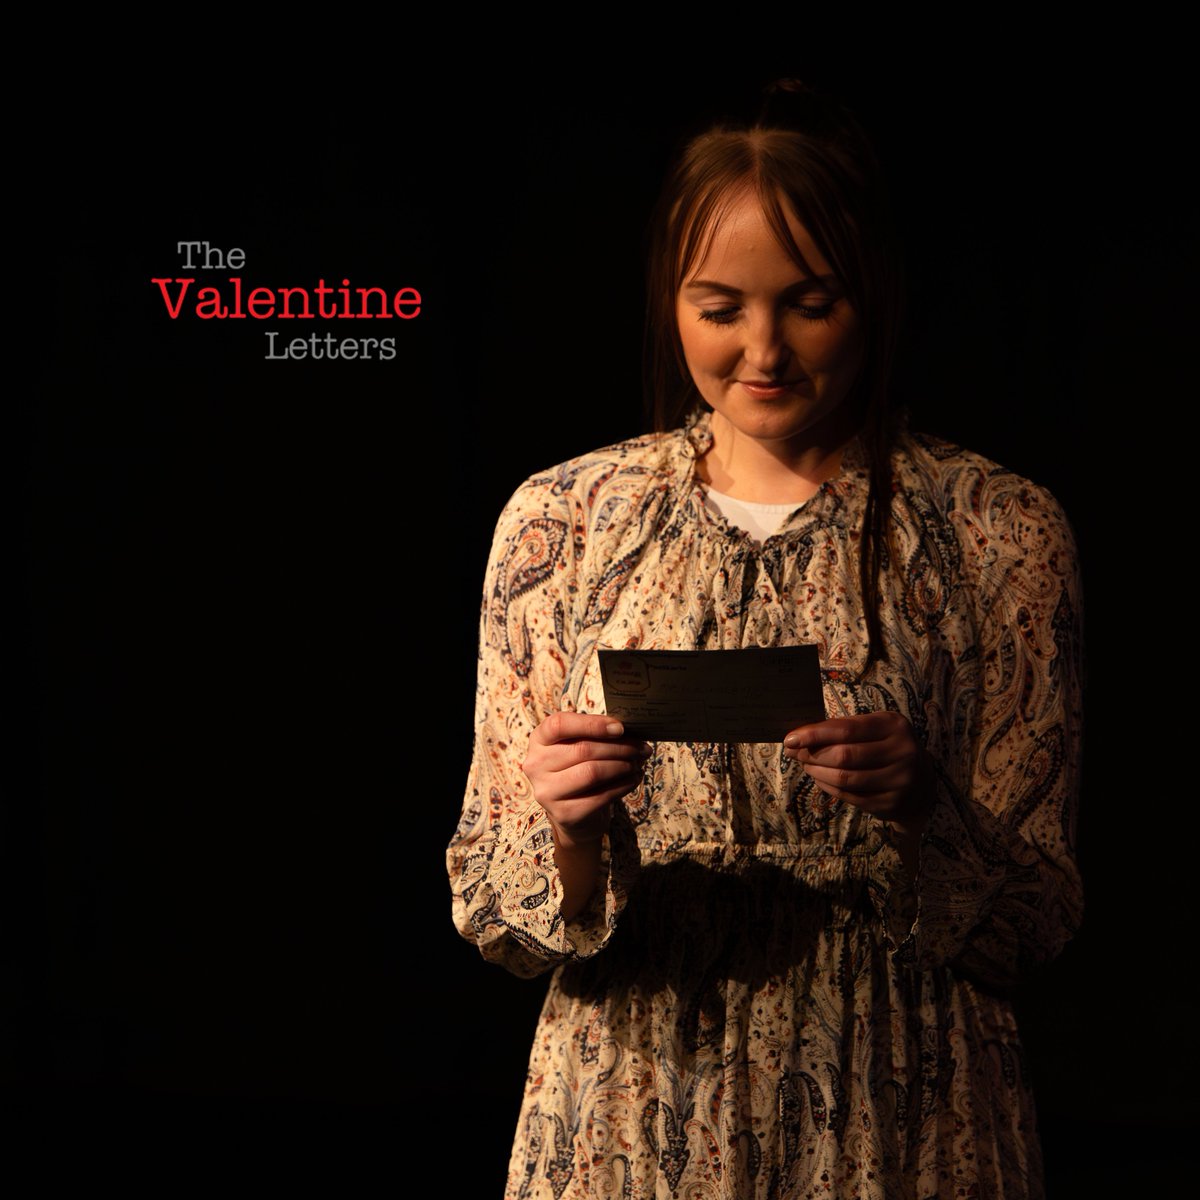 Mere three weeks until curtain up on our June tour of the play The Valentine Letters showing @mission_theatre @bathfringe (4/5 June) @BrocJackTheatre (11-22 June) @ThePlaceBedford (26-28 June) Tickets stevedarlow.com/the-valentine-…. The play's based on correspondence between ... (1/3)